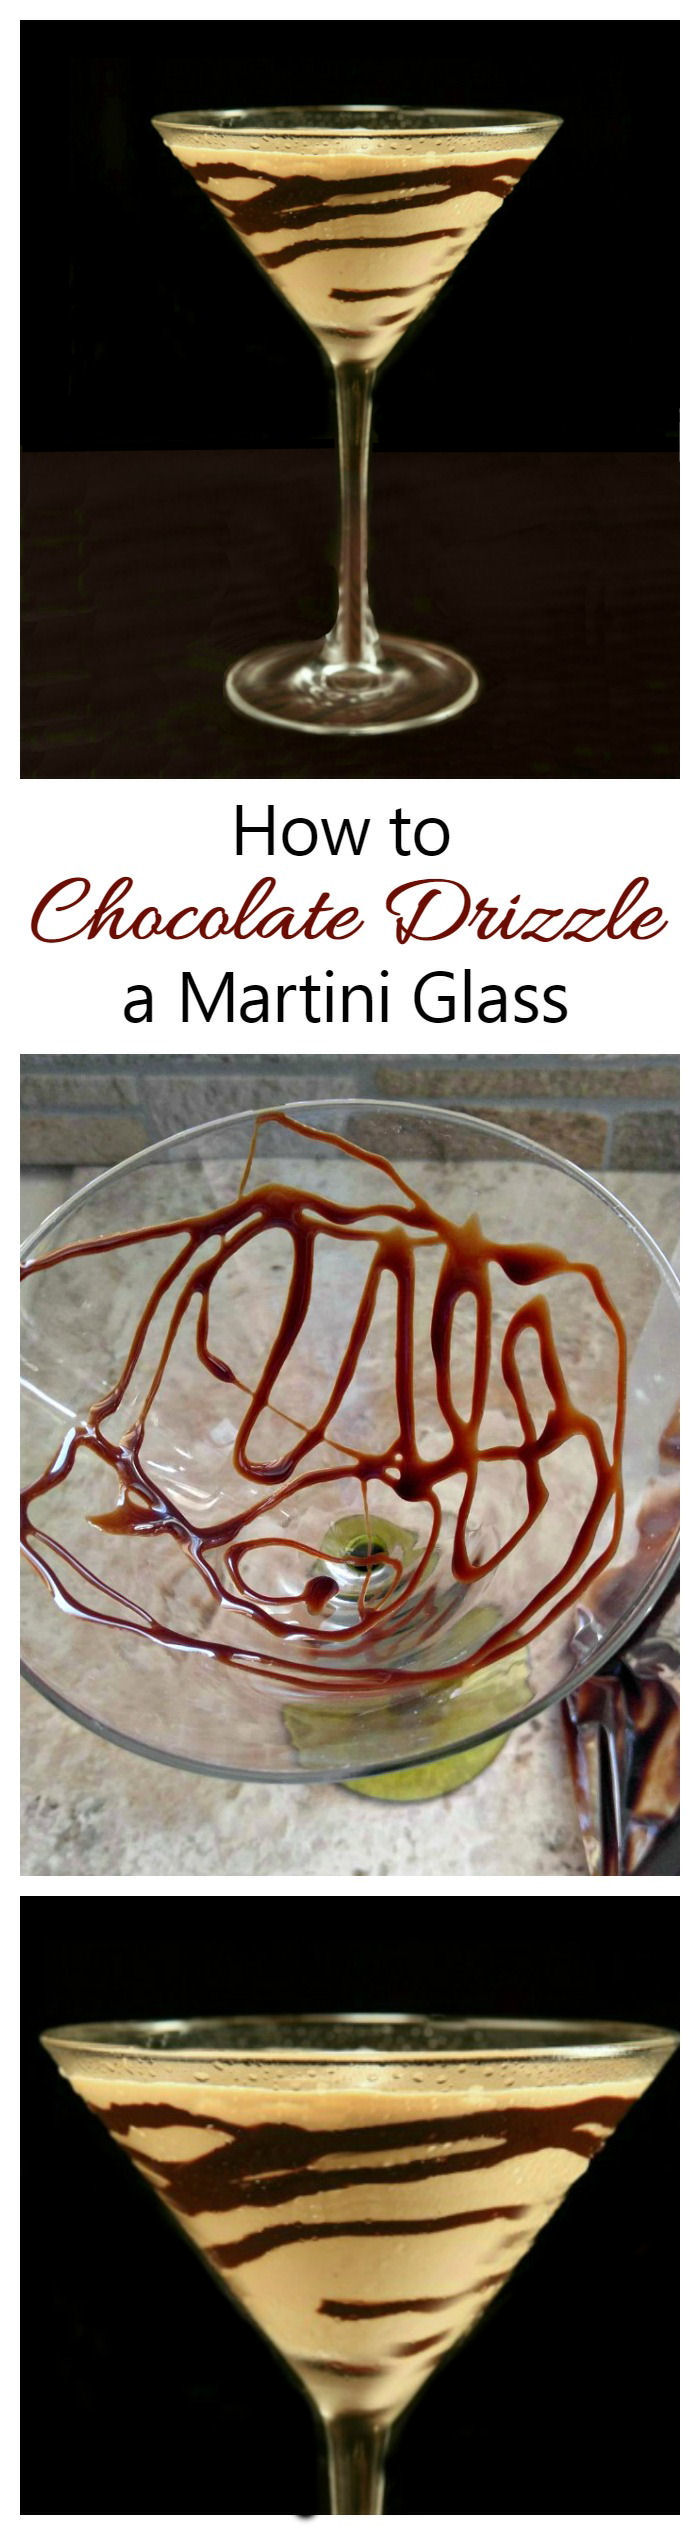 Chocolate drizzle on a martini glass glass makes a lovely presentation to any chocolate or coffee inspired cocktail. It is simple to do, too~